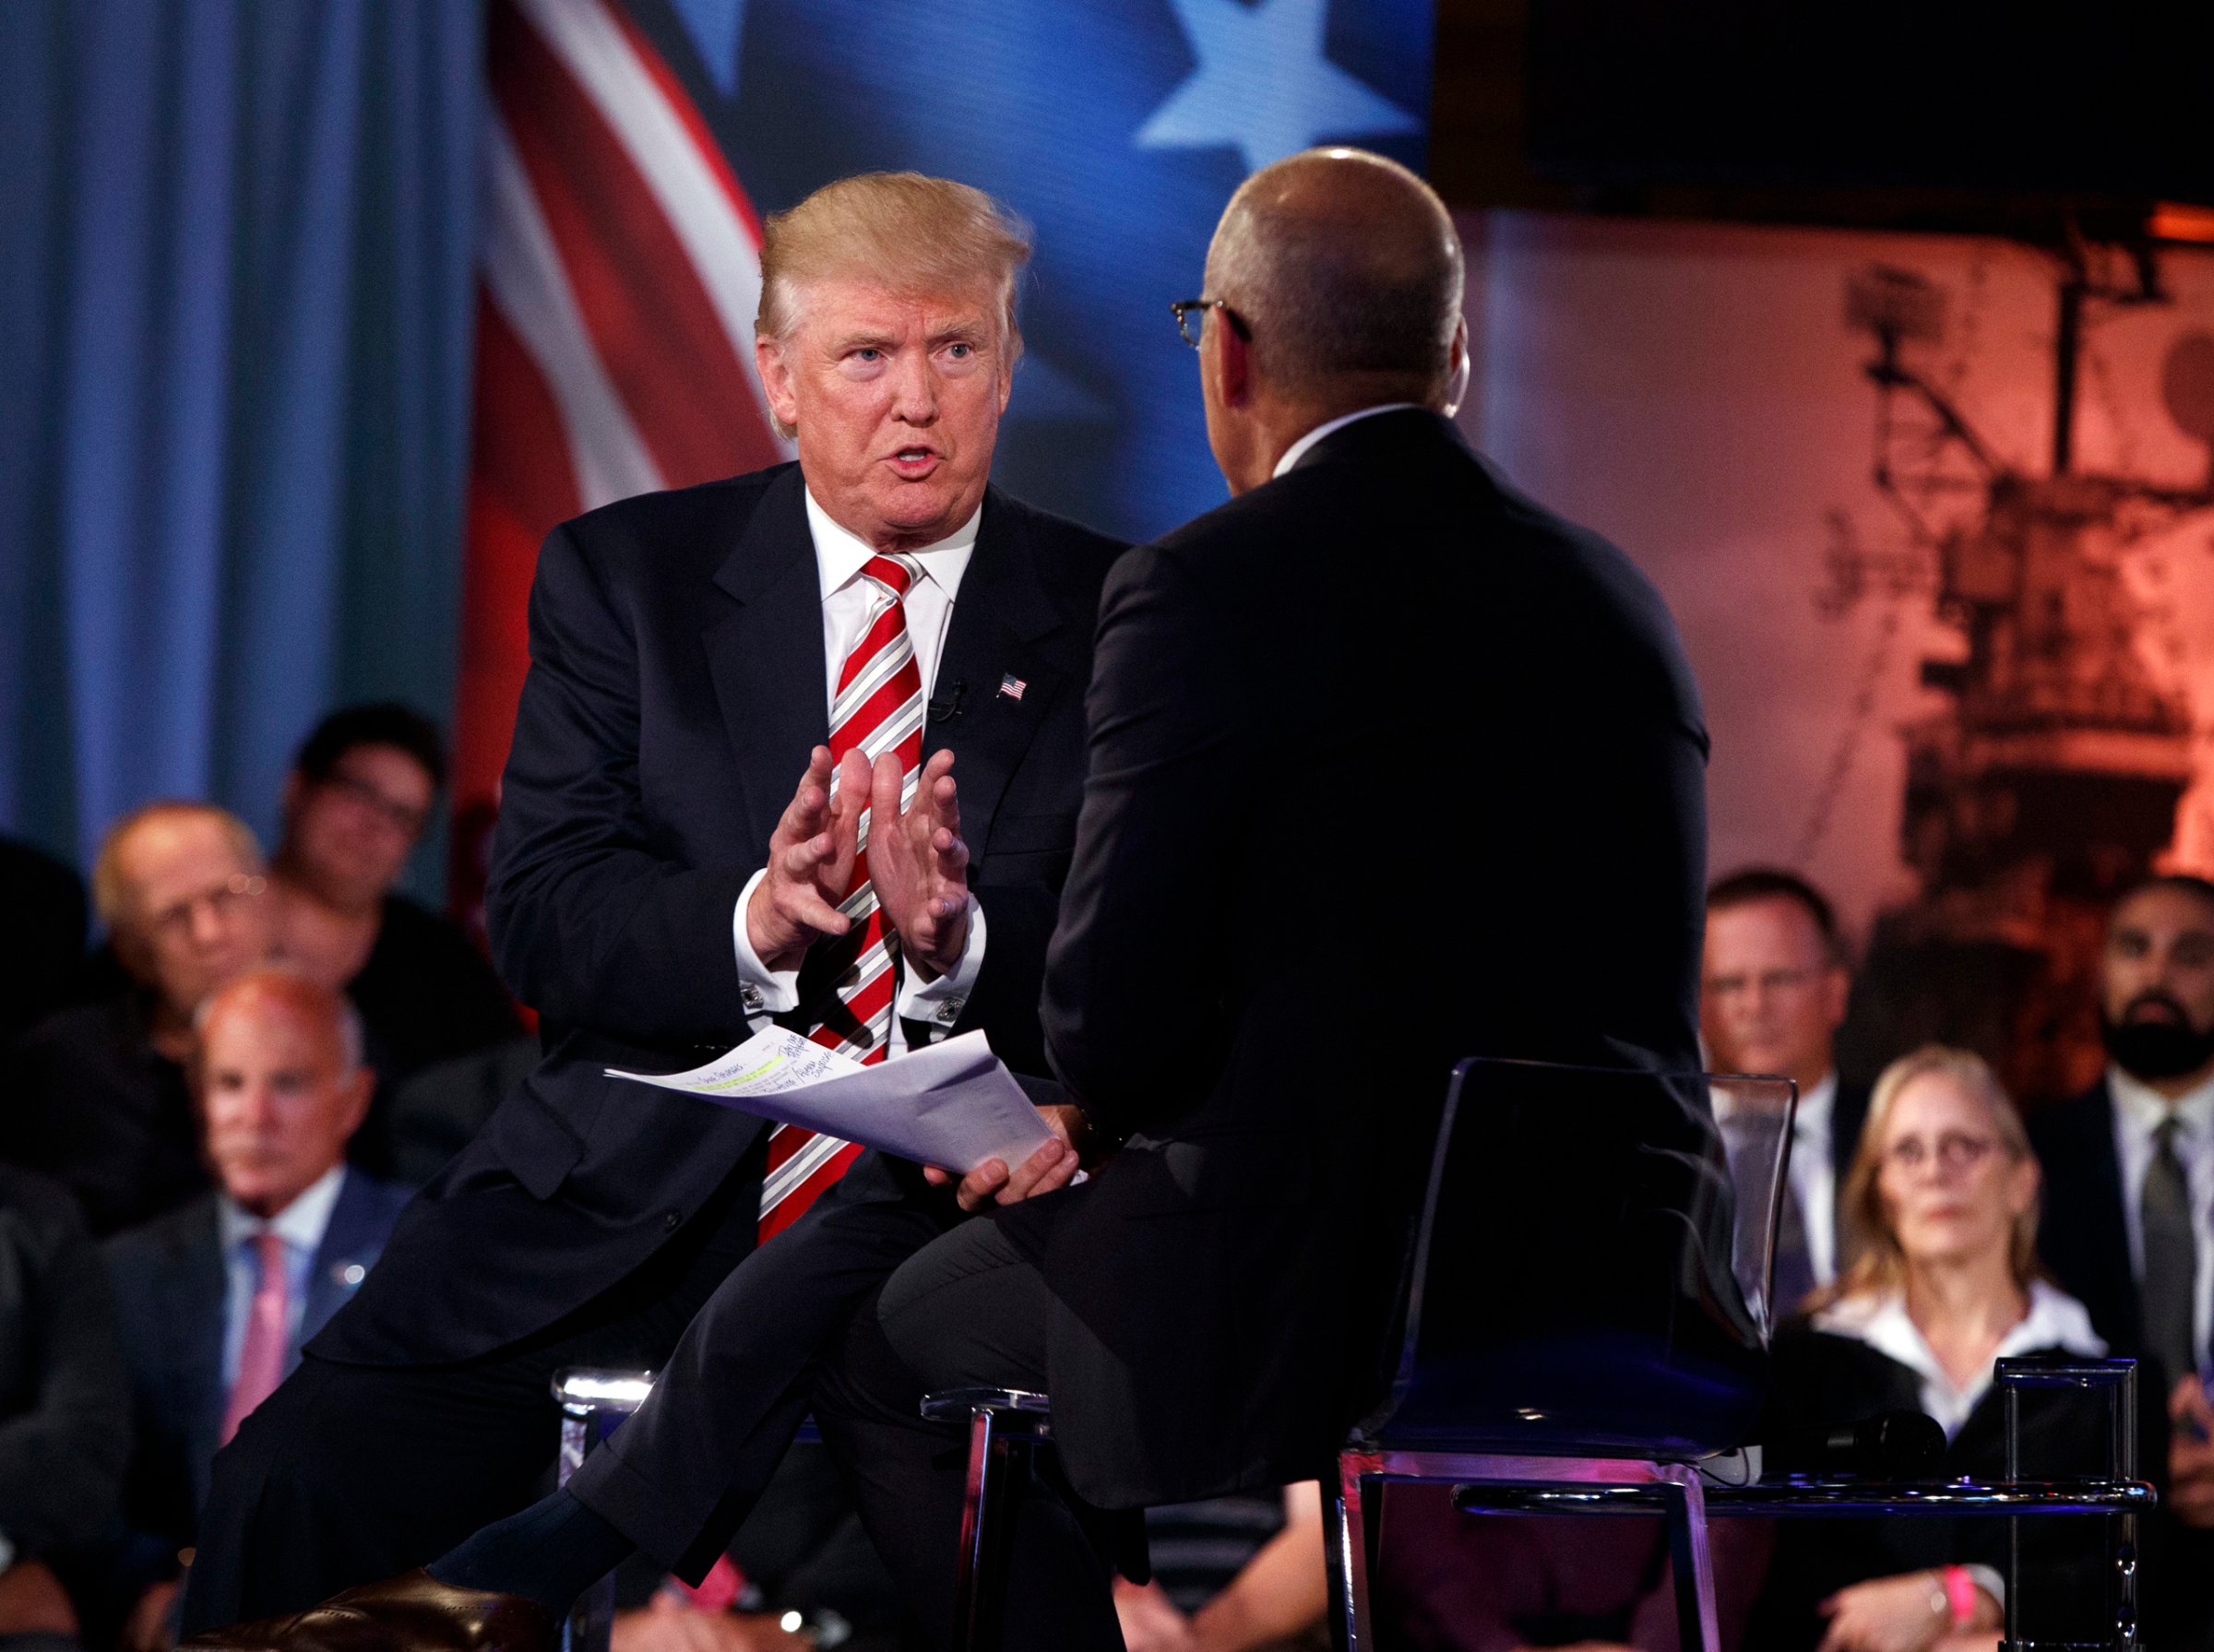 Republican presidential candidate Donald Trump speaks with 'Today' show co-anchor Matt Lauer at the NBC Commander-In-Chief Forum held at the Intrepid Sea, Air and Space museum aboard the decommissioned aircraft carrier Intrepid, New York City on Sept. 7, 2016.